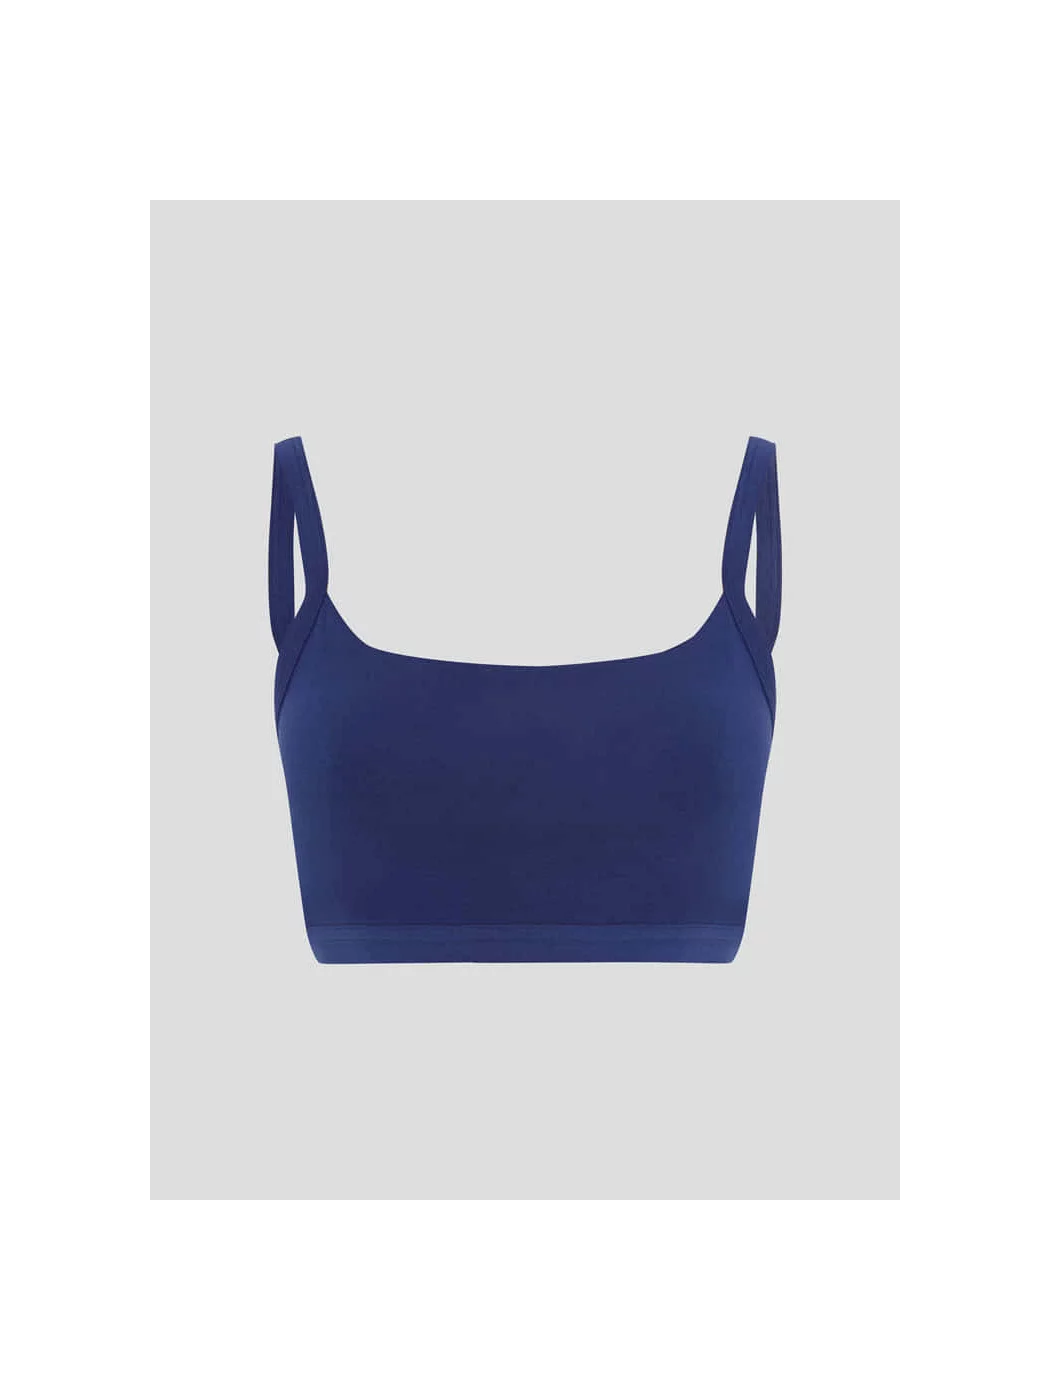  Blue Canoe Organic Cotton & Spandex Day and Maternity Bra Black  : Clothing, Shoes & Jewelry